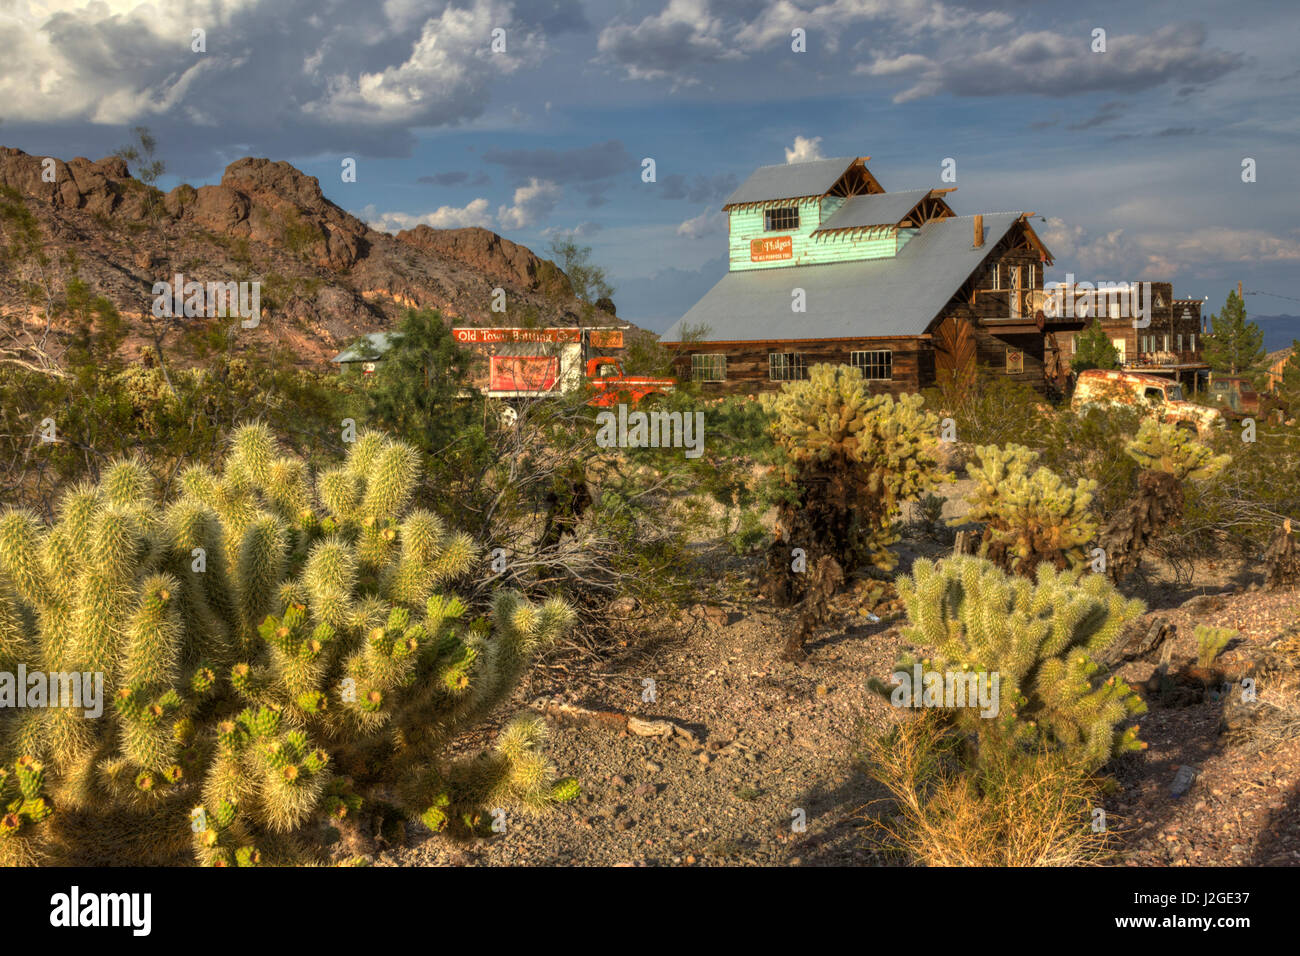 USA, Nevada, Clark County. City of Nelson. Buildings and the landscape that shows the city well with teddy bear cholla cactus. Stock Photo